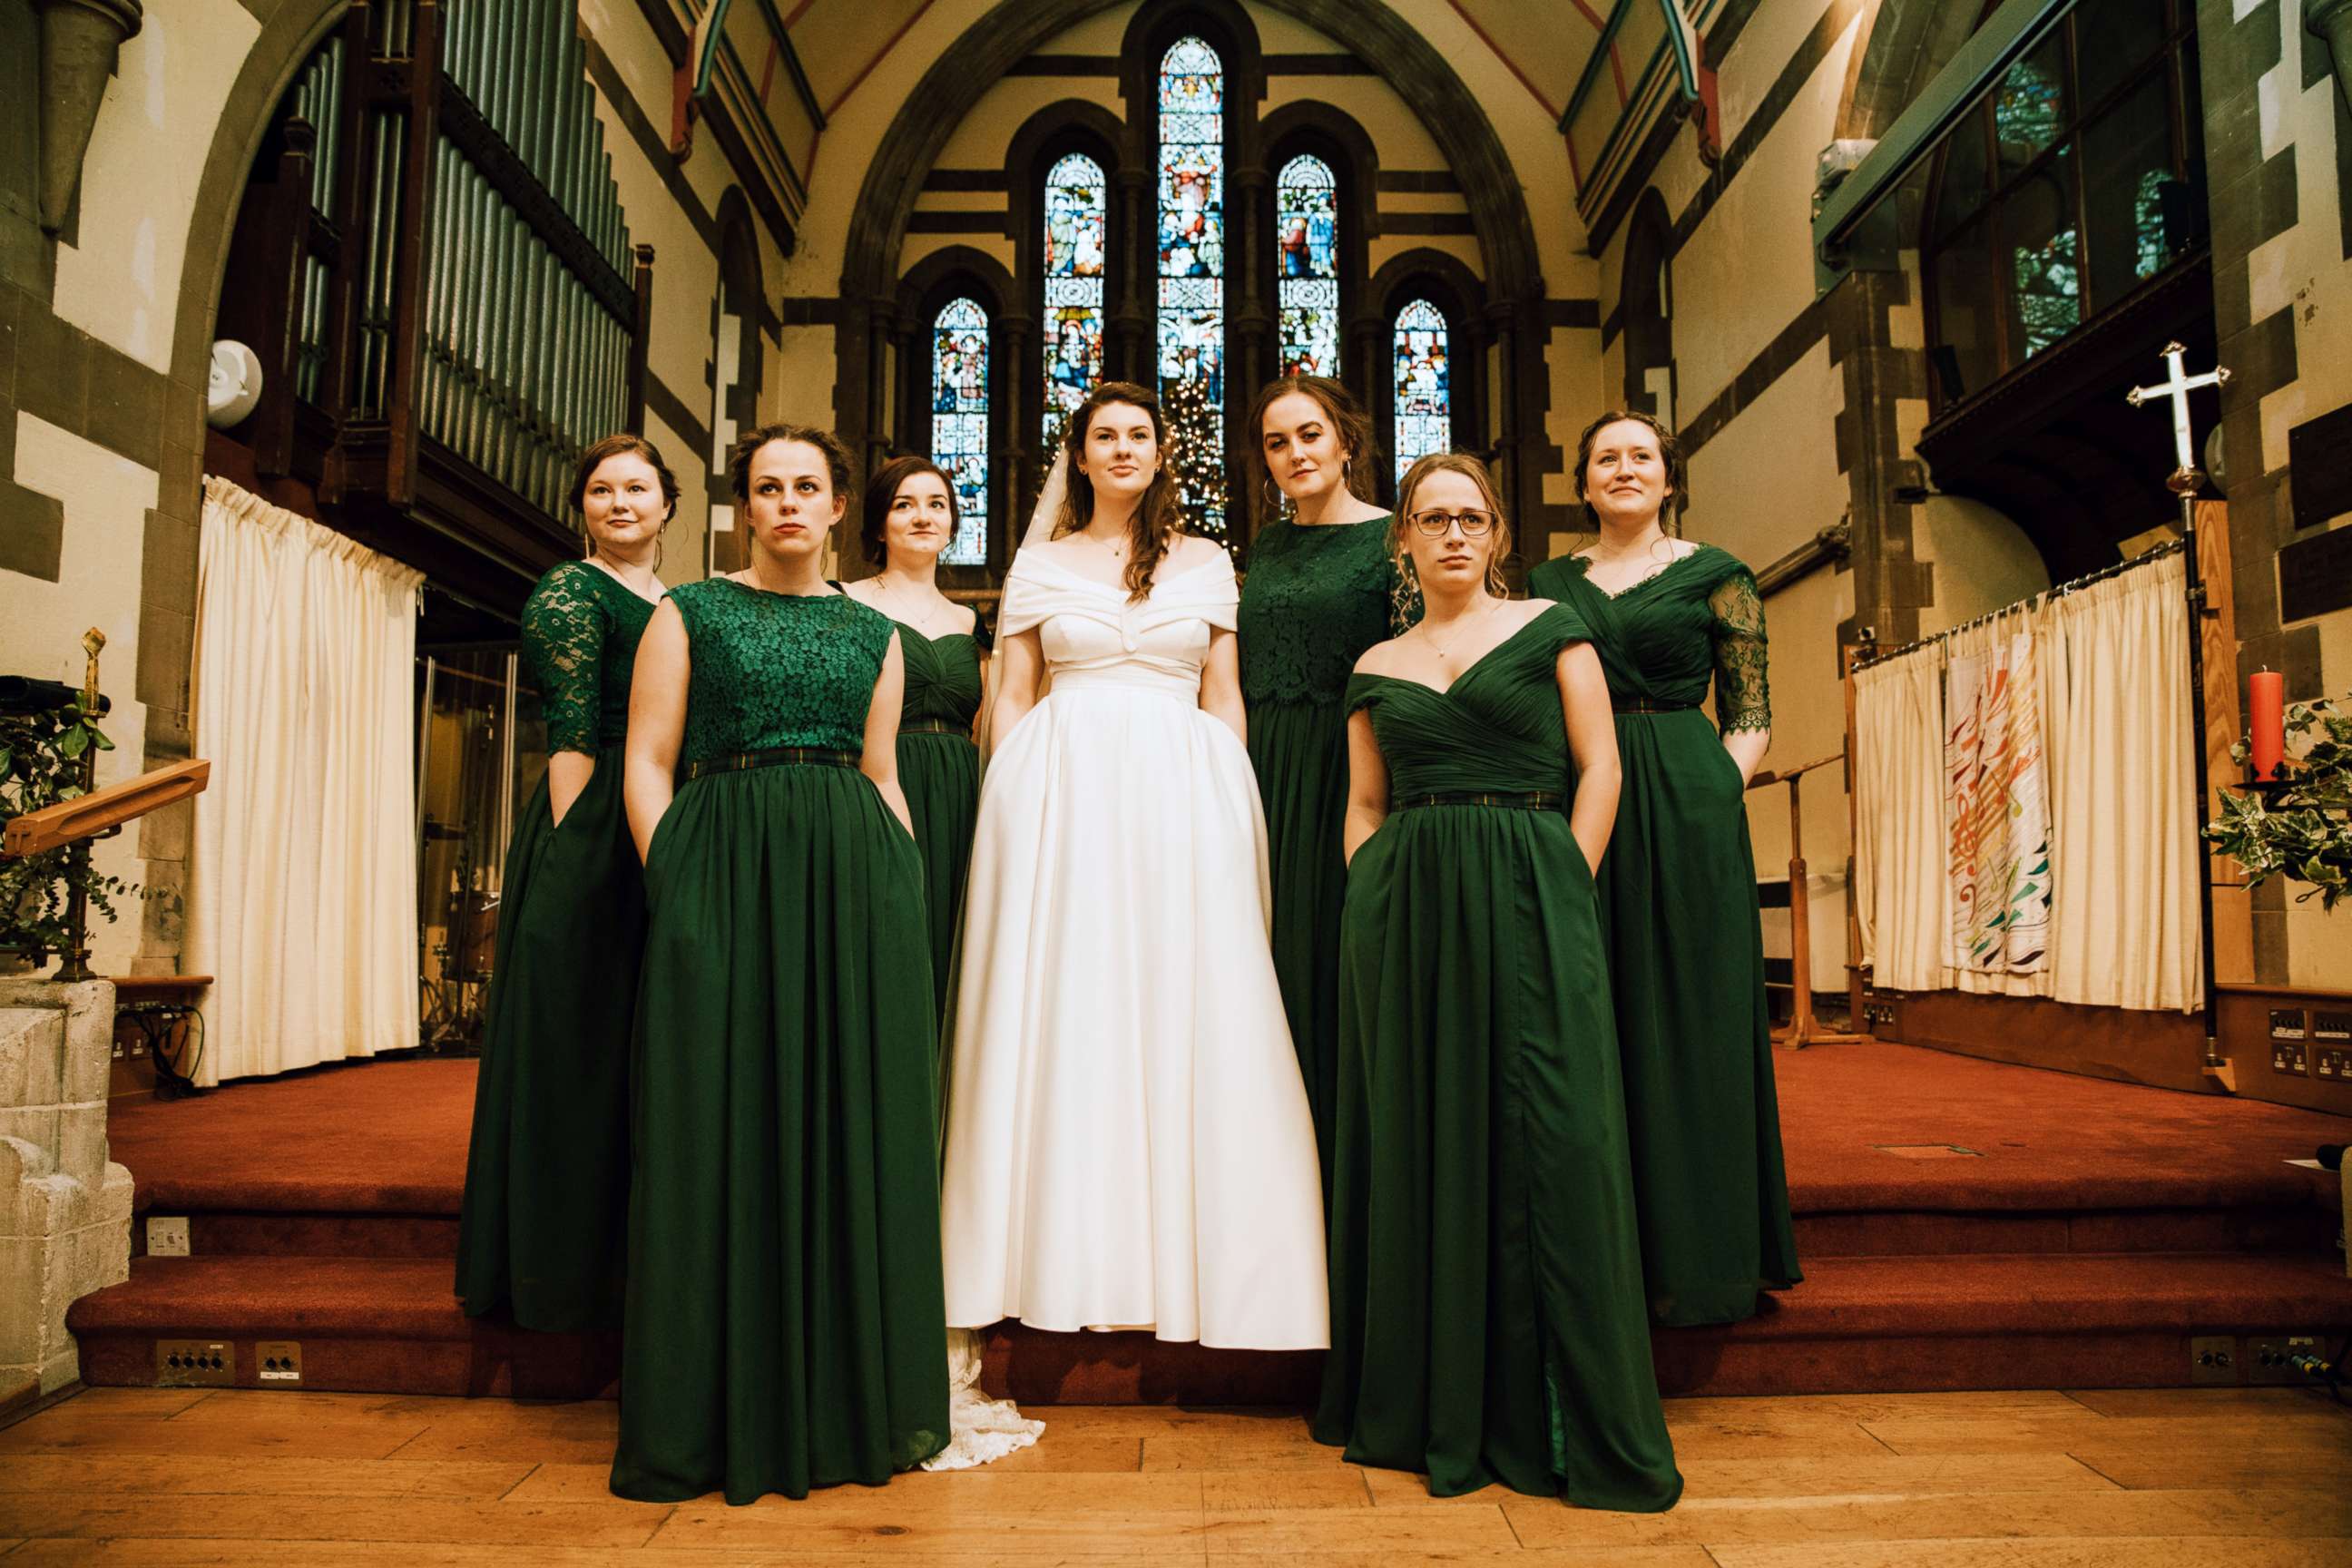 PHOTO: Evelyn Paterson, 24, showed off her dress pockets along with her bridesmaids on her December 8th, 2018, wedding day at All Saints Woodford Wells, North East London.